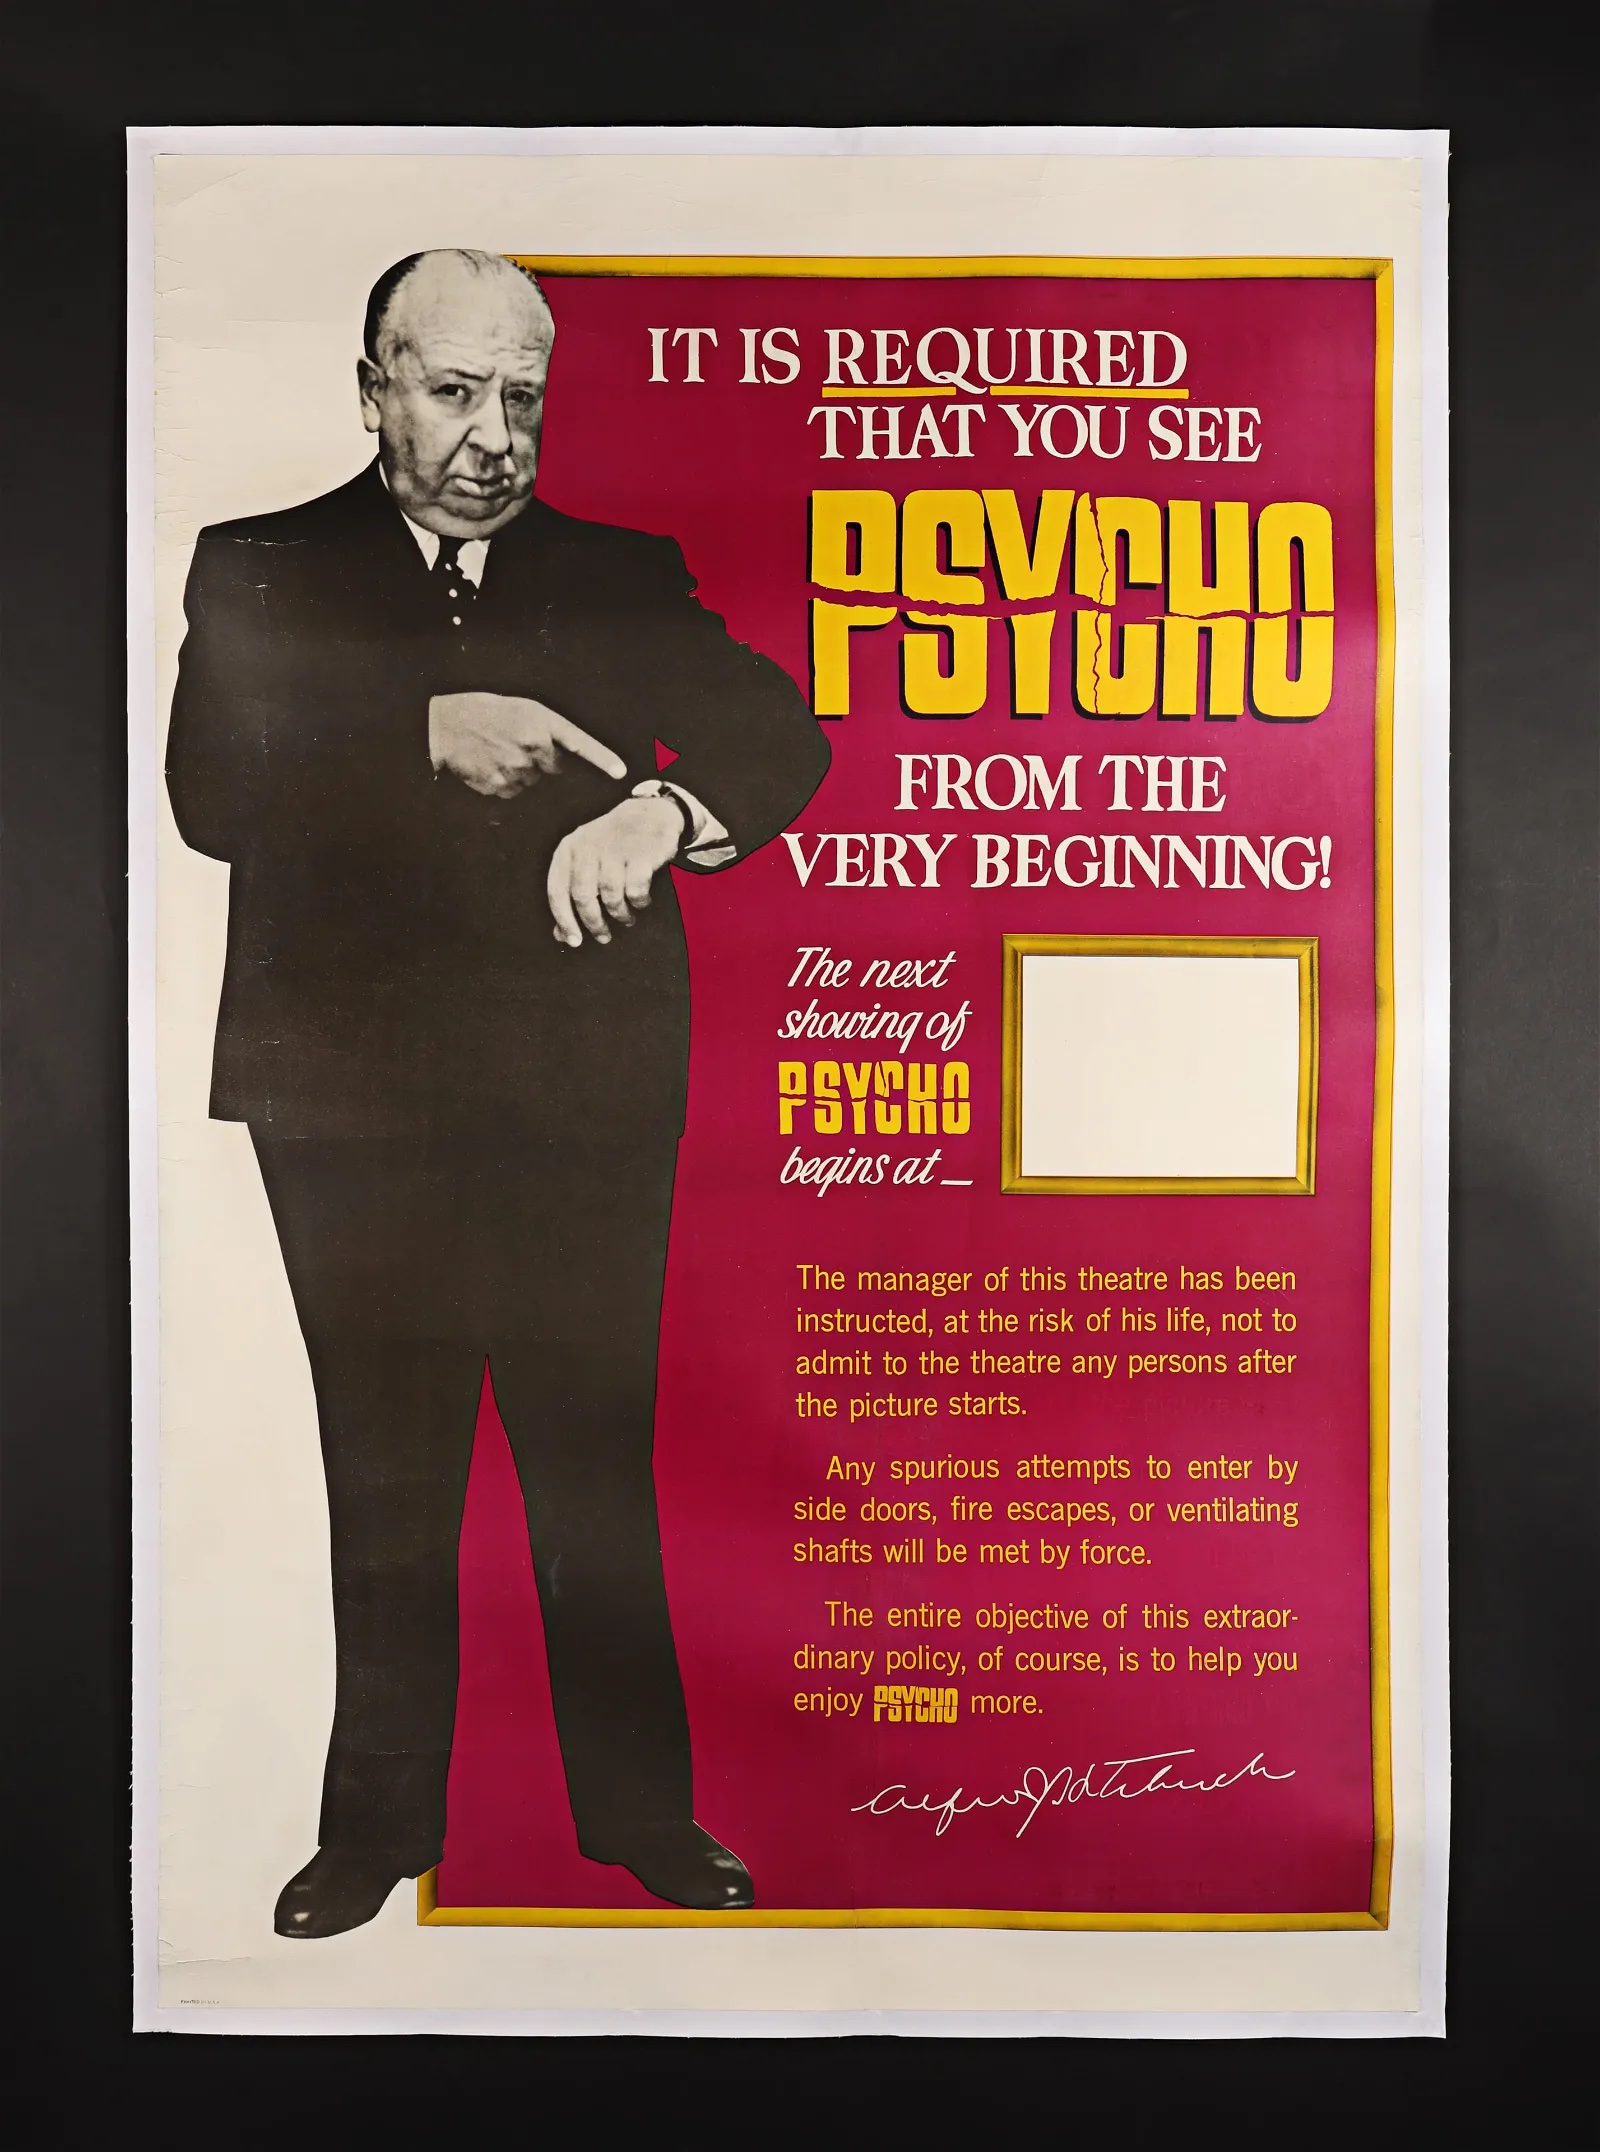 ‘Psycho’ one-sheet featuring Hitchcock leads our five auction highlights